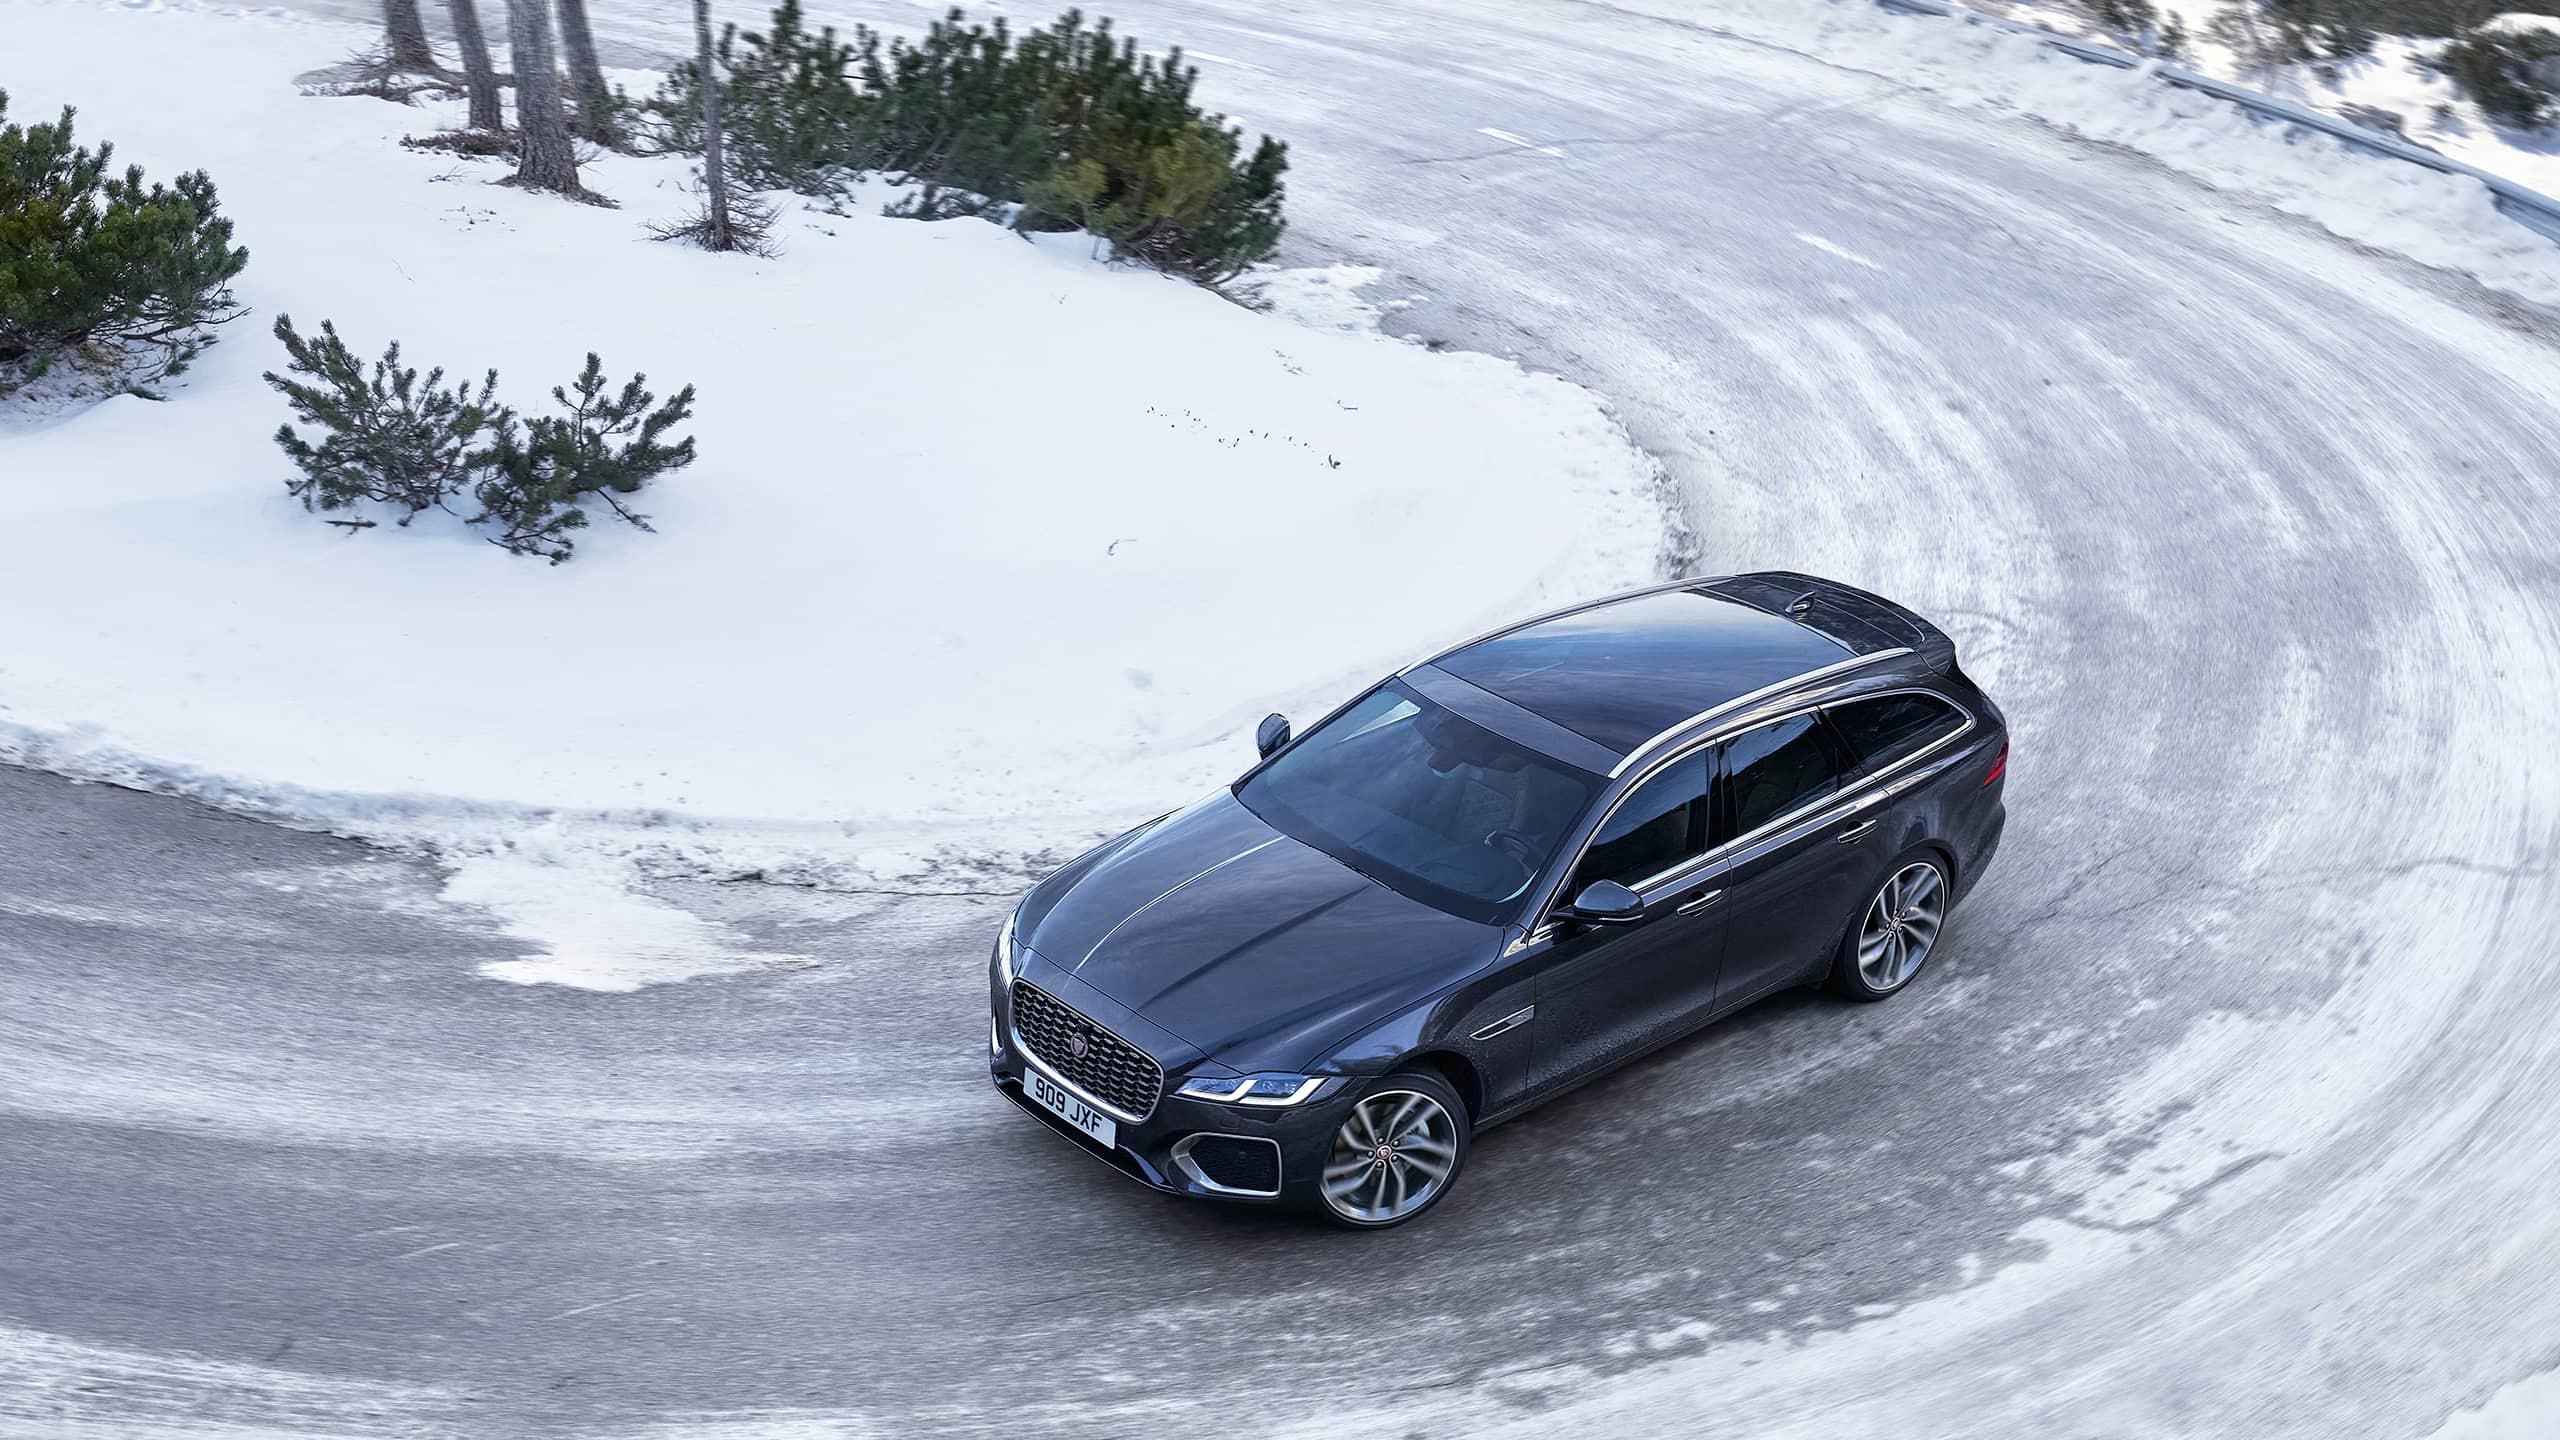 Parked Jaguar XF running on ice road